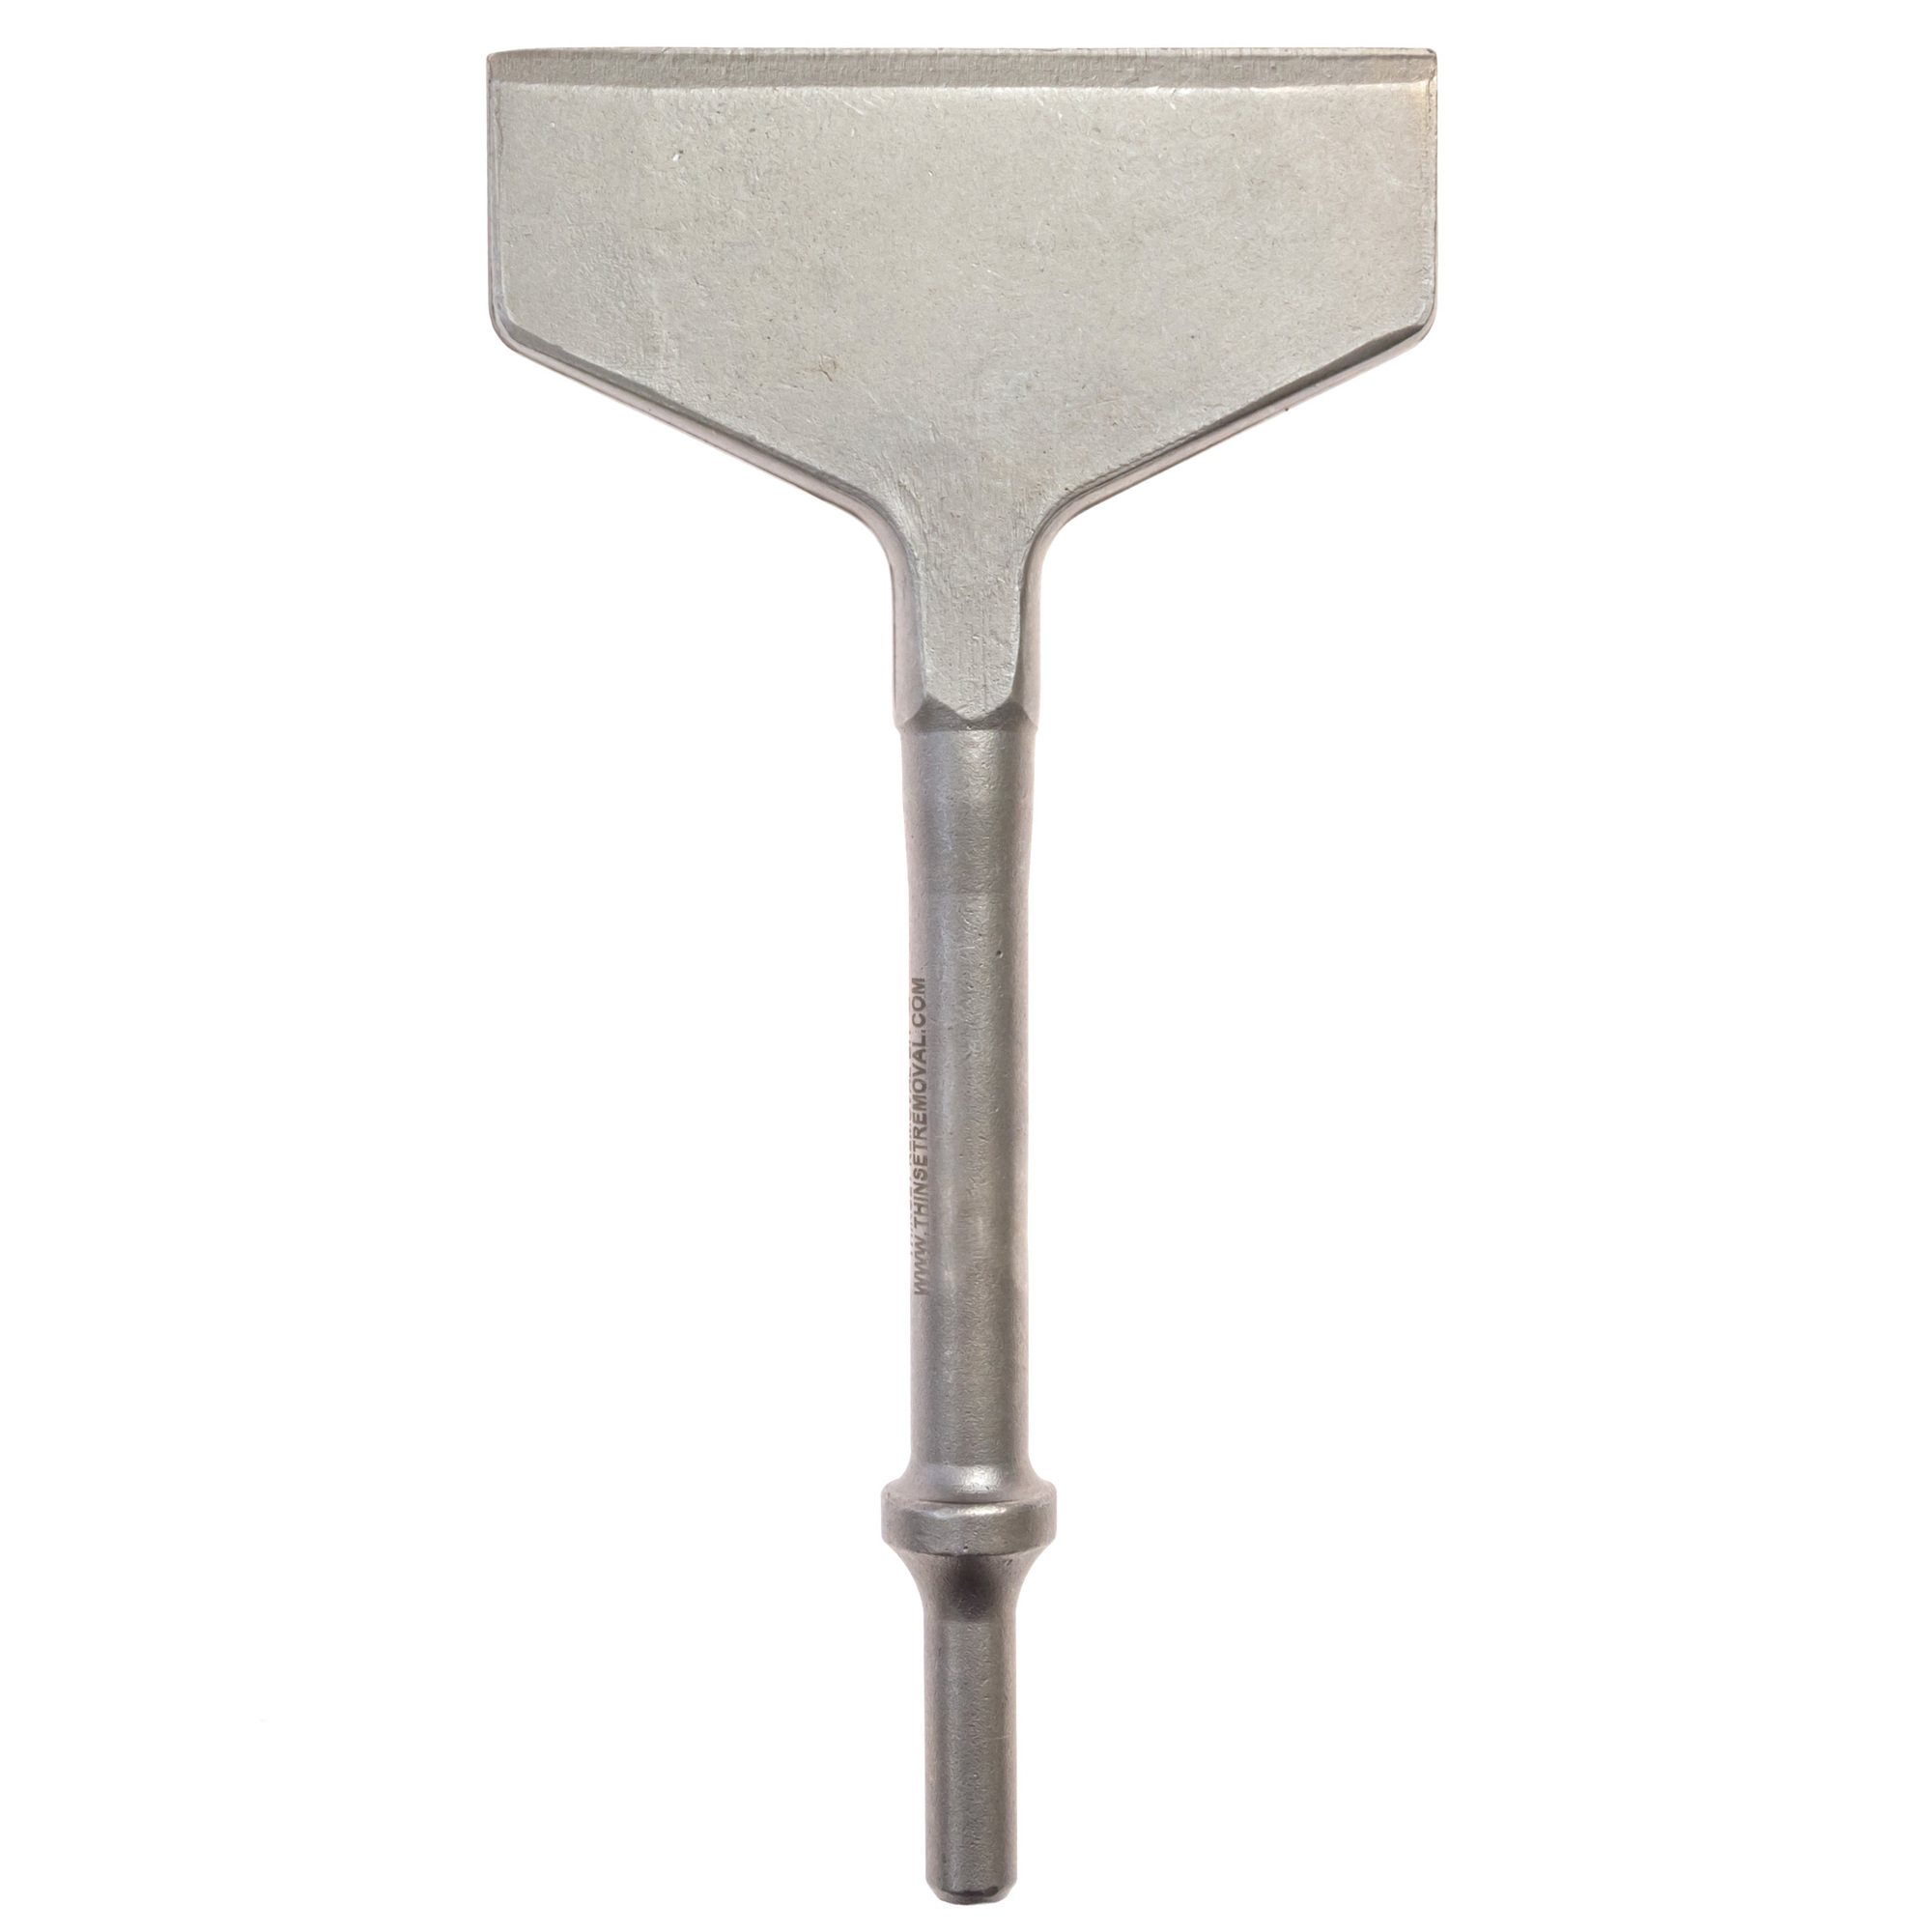 THINSET REMOVAL BIT, Round Shank Scaling Chisel, Blade Width 4 in, Model 4TRBRS